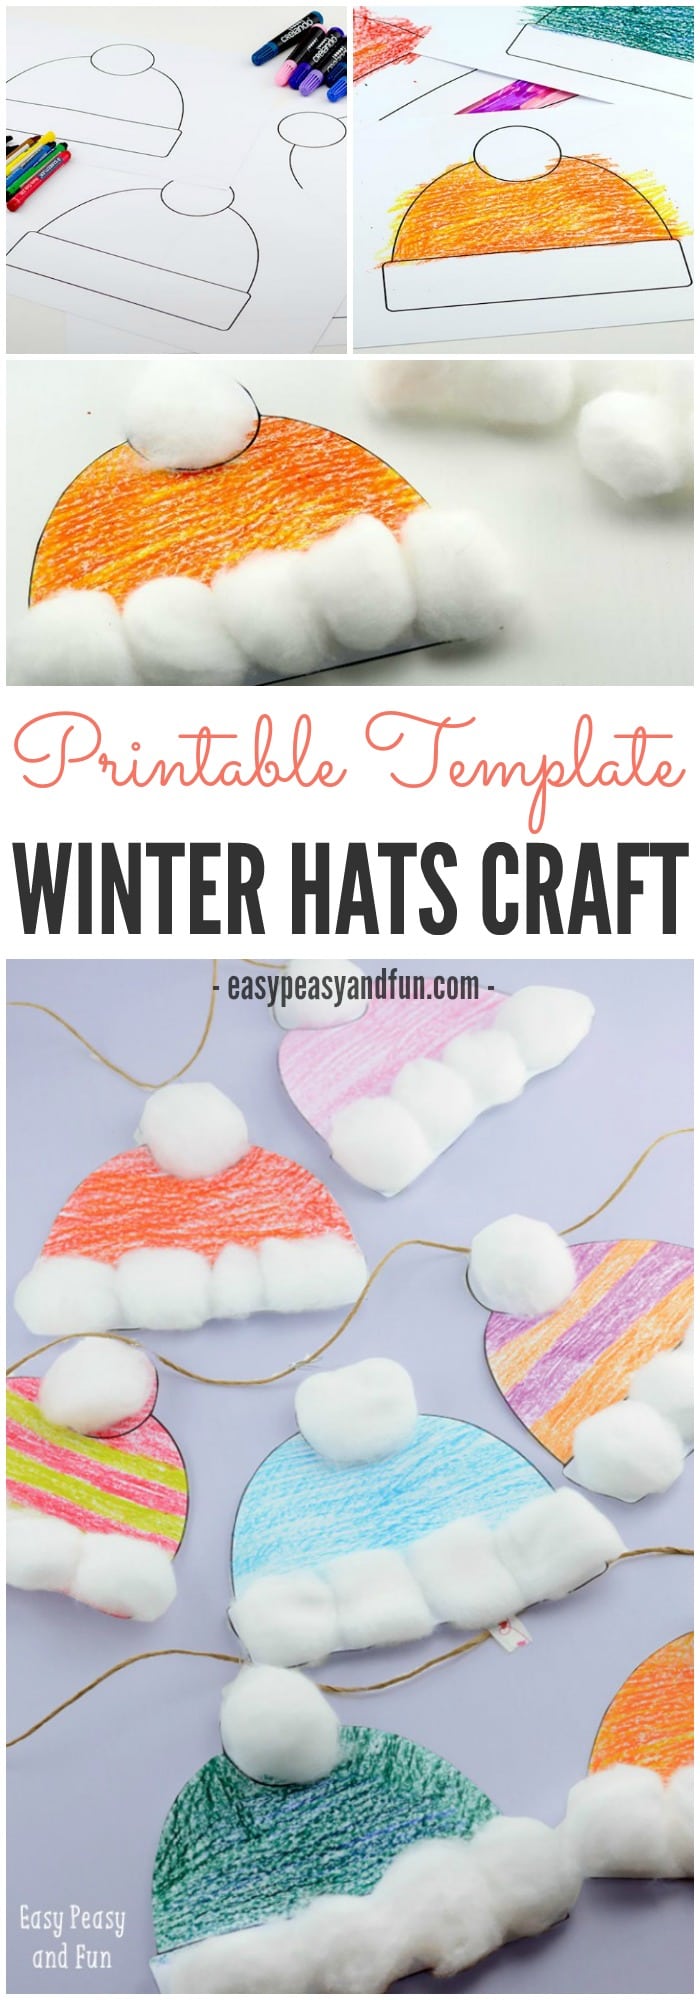 Free Printable Winter Hats Craft for Kids